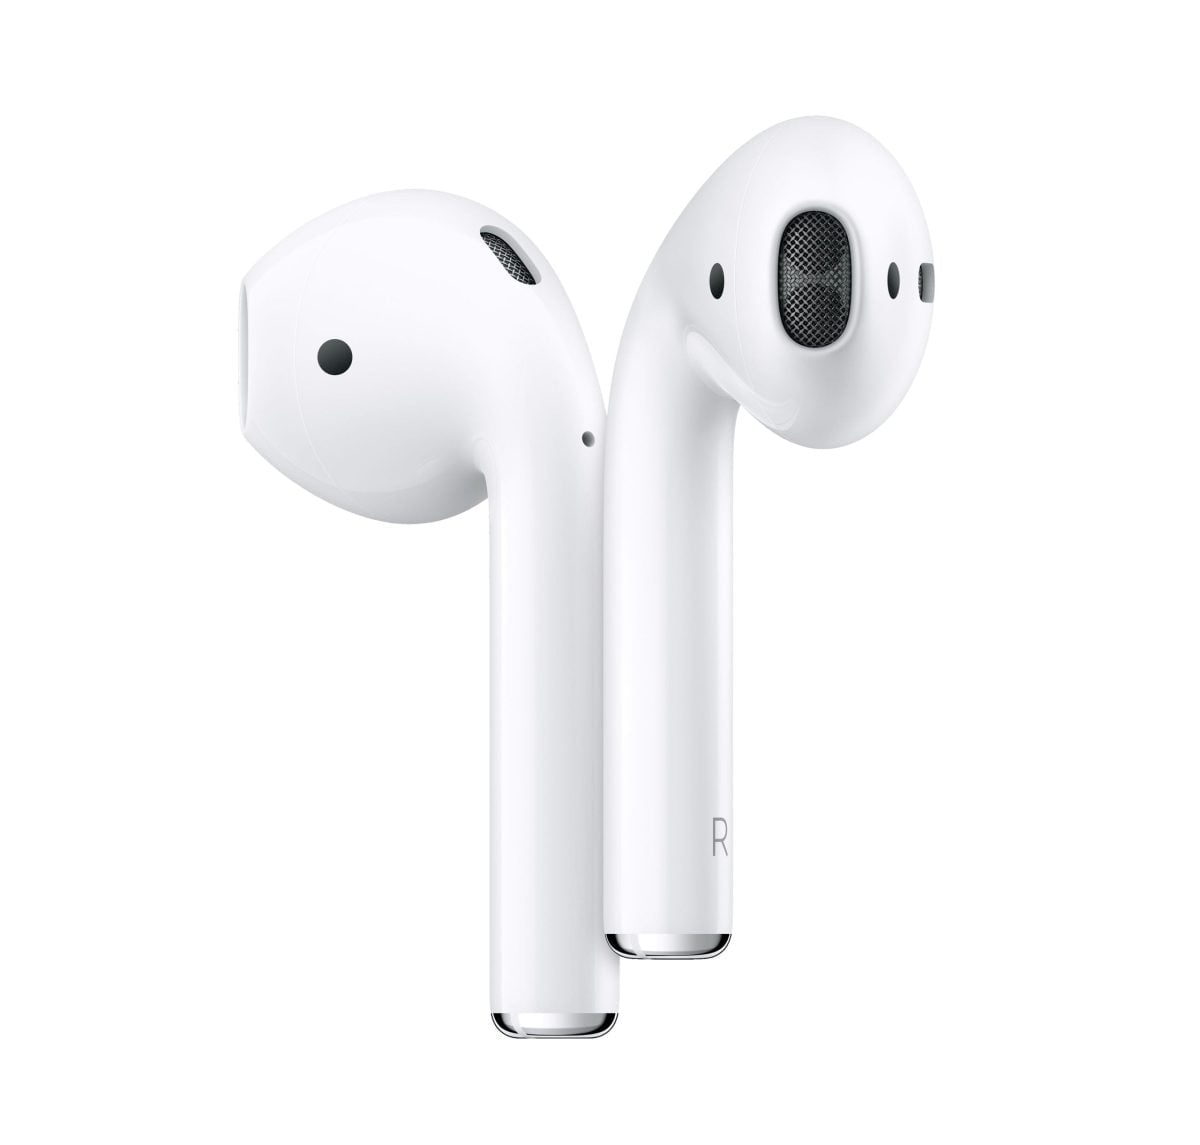 6083595 Sd Scaled Apple &Lt;Div&Gt; &Lt;H1&Gt;Apple Airpods With Wireless Charging Case - White Model Mrxj2Am/A&Lt;/H1&Gt; &Lt;Div&Gt;Airpods Combine Intelligent Design With Breakthrough Technology And Crystal-Clear Sound. Powered By The New Apple H1 Headphone Chip, Airpods Now Feature Hands-Free Access To Siri Using Just Your Voice. And Up To 3 Hours Of Talk Time On A Single Charge.&Lt;/Div&Gt; &Lt;/Div&Gt; &Lt;Div&Gt; &Lt;Div Class=&Quot;List-Row&Quot;&Gt; &Lt;Ul&Gt; &Lt;Li Class=&Quot;Body-Copy&Quot;&Gt;Automatically On, Automatically Connected&Lt;/Li&Gt; &Lt;Li Class=&Quot;Body-Copy&Quot;&Gt;Easy Setup For All Your Apple Devices&Lt;/Li&Gt; &Lt;Li Class=&Quot;Body-Copy&Quot;&Gt;Quick Access To Siri By Saying, Hey Siri&Lt;/Li&Gt; &Lt;Li Class=&Quot;Body-Copy&Quot;&Gt;Double-Tap To Play Or Skip Forward&Lt;/Li&Gt; &Lt;Li Class=&Quot;Body-Copy&Quot;&Gt;New Apple H1 Headphone Chip Delivers A Faster Wireless Connection To Your Devices&Lt;/Li&Gt; &Lt;Li Class=&Quot;Body-Copy&Quot;&Gt;Charges Quickly In The Case&Lt;/Li&Gt; &Lt;Li Class=&Quot;Body-Copy&Quot;&Gt;Case Can Be Charged Using The Lightning Connector&Lt;/Li&Gt; &Lt;Li Class=&Quot;Body-Copy&Quot;&Gt;Rich, High-Quality Audio And Voice&Lt;/Li&Gt; &Lt;Li Class=&Quot;Body-Copy&Quot;&Gt;Seamless Switching Between Devices&Lt;/Li&Gt; &Lt;Li Class=&Quot;Body-Copy&Quot;&Gt;Listen And Talk All Day With Multiple Charges From The Charging Case&Lt;/Li&Gt; &Lt;/Ul&Gt; &Lt;/Div&Gt; &Lt;Div Class=&Quot;List-Row&Quot;&Gt;&Lt;/Div&Gt; &Lt;Div Class=&Quot;List-Row&Quot;&Gt; &Lt;P Class=&Quot;Body-Copy&Quot;&Gt;&Lt;Span Style=&Quot;Font-Family: Consolas, Monaco, Monospace&Quot;&Gt;One Year Apple Warranty&Lt;/Span&Gt;&Lt;/P&Gt; &Lt;/Div&Gt; &Lt;/Div&Gt; Apple Airpods Apple Airpods With Wireless Charging Case - White Model Mrxj2Am/A